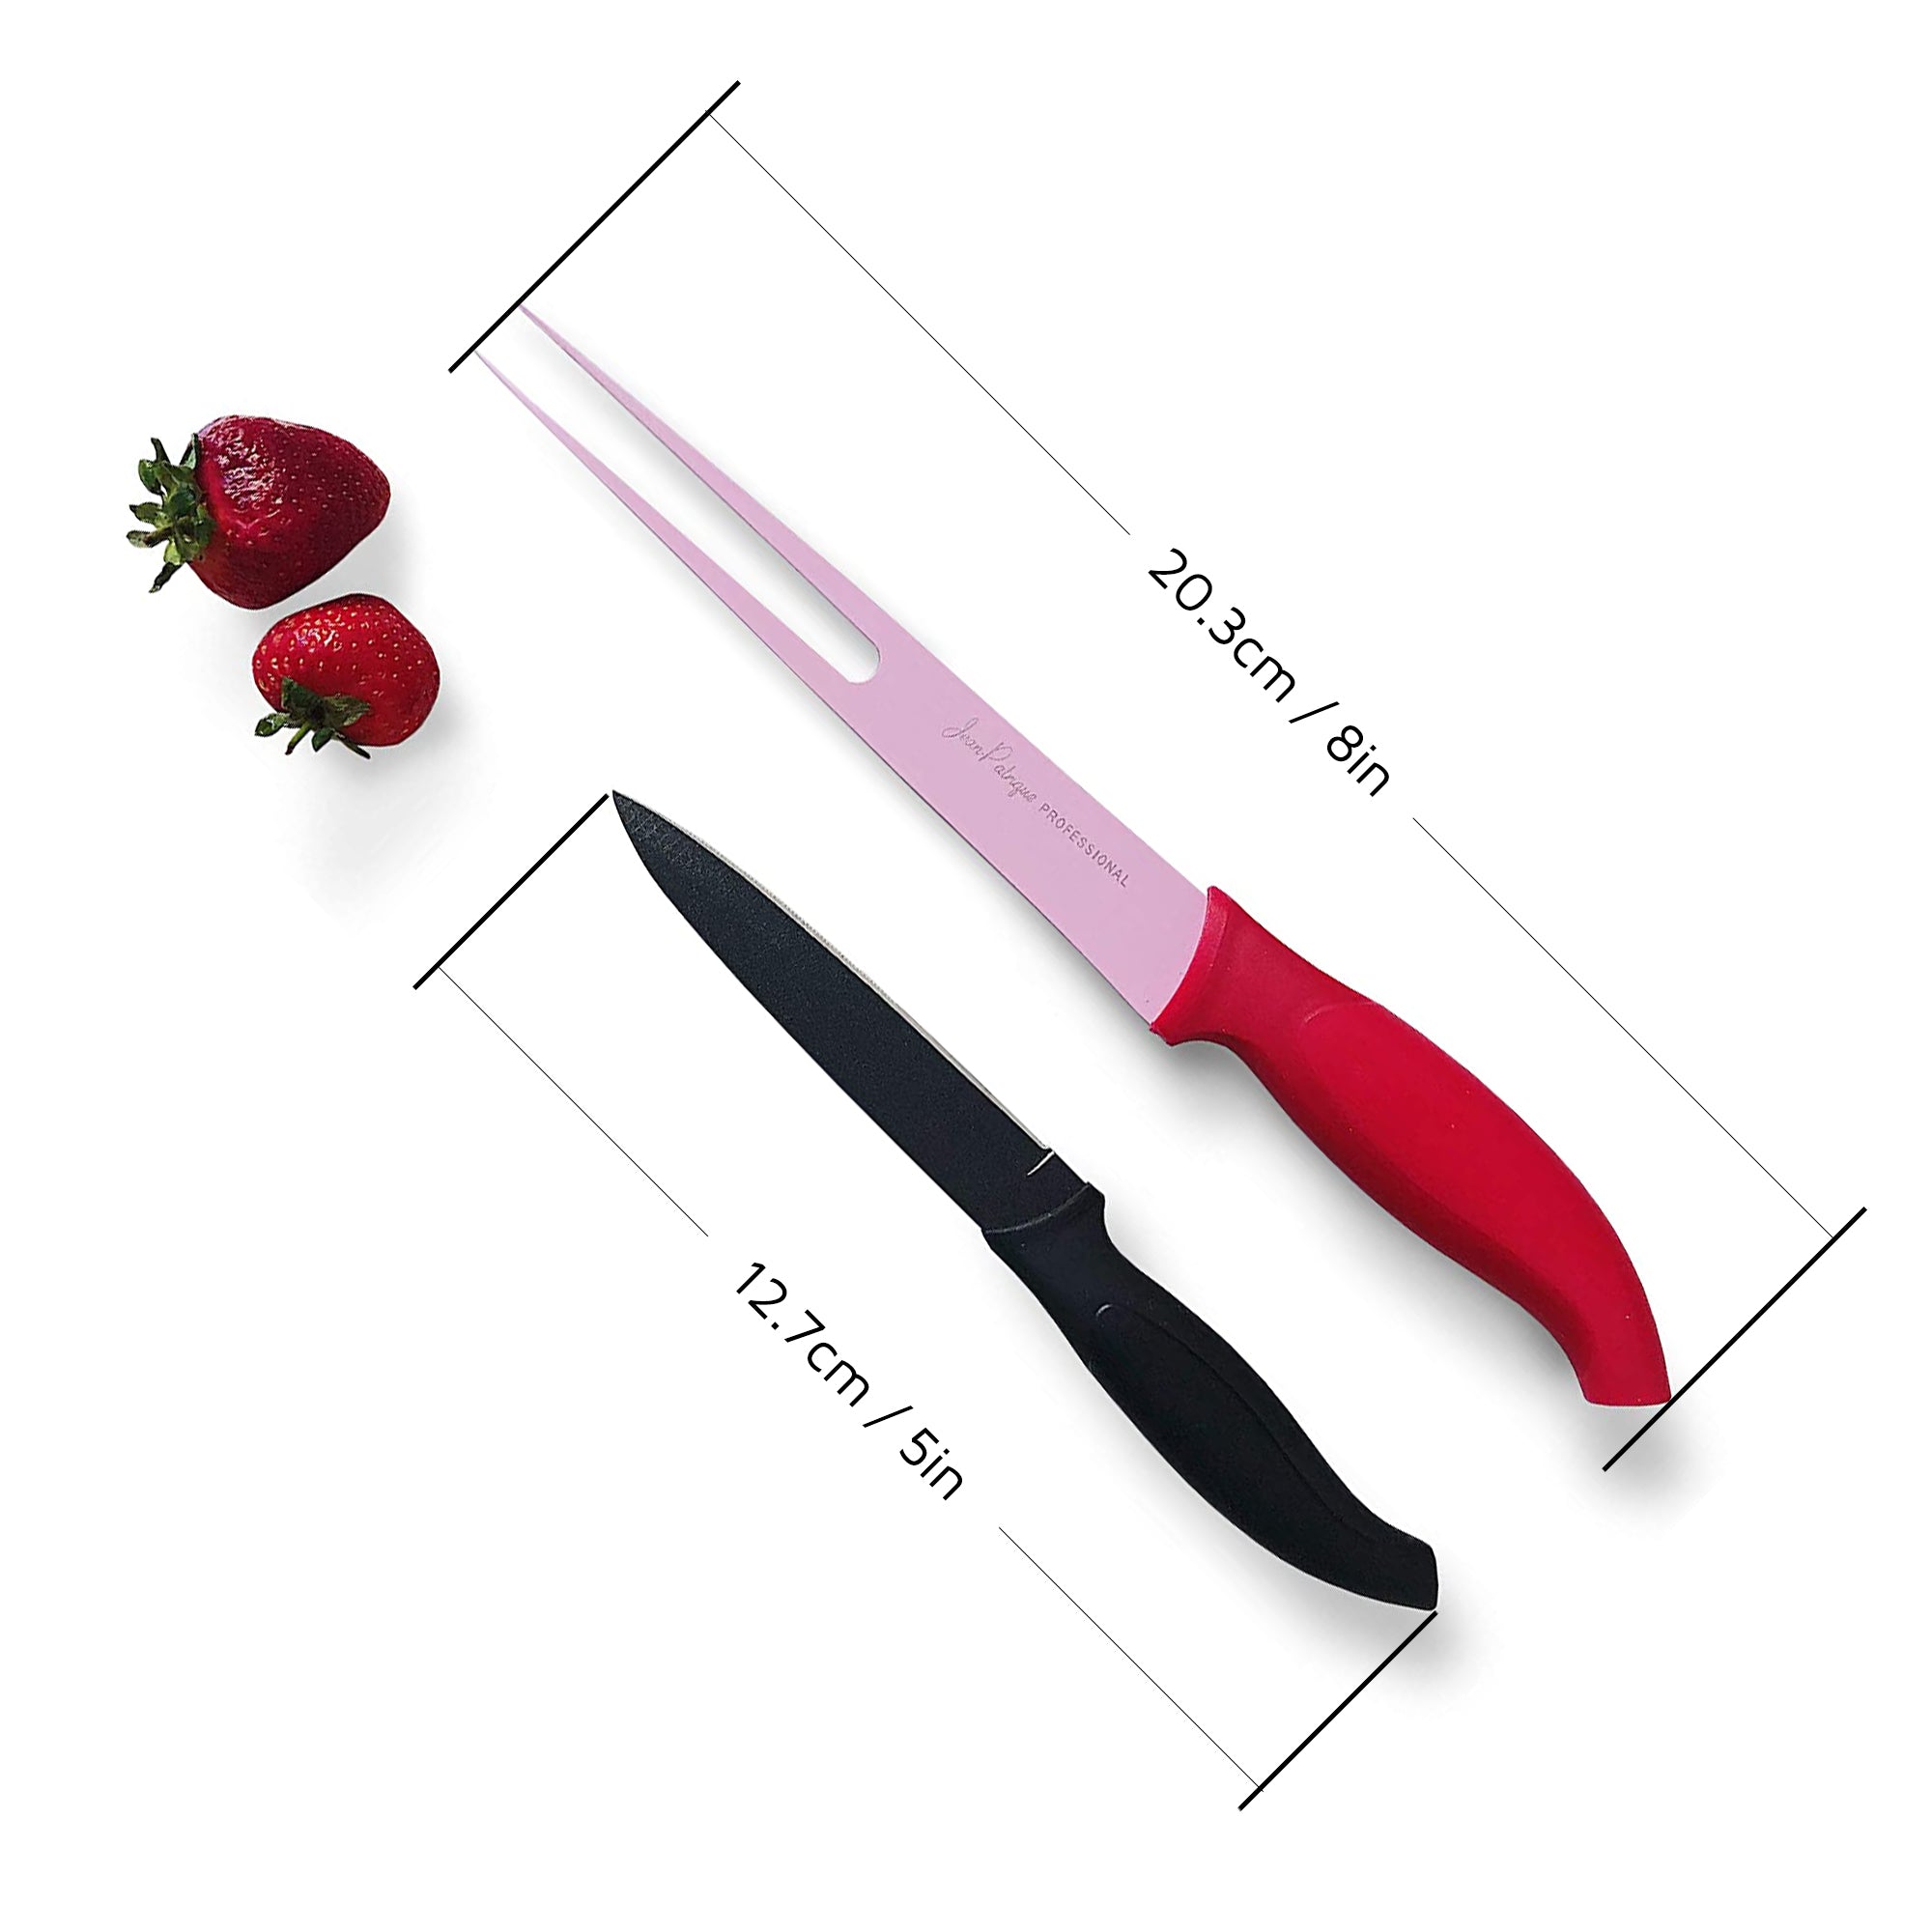  Carving Knife and Fork Set - 8 Inch Professional Meat